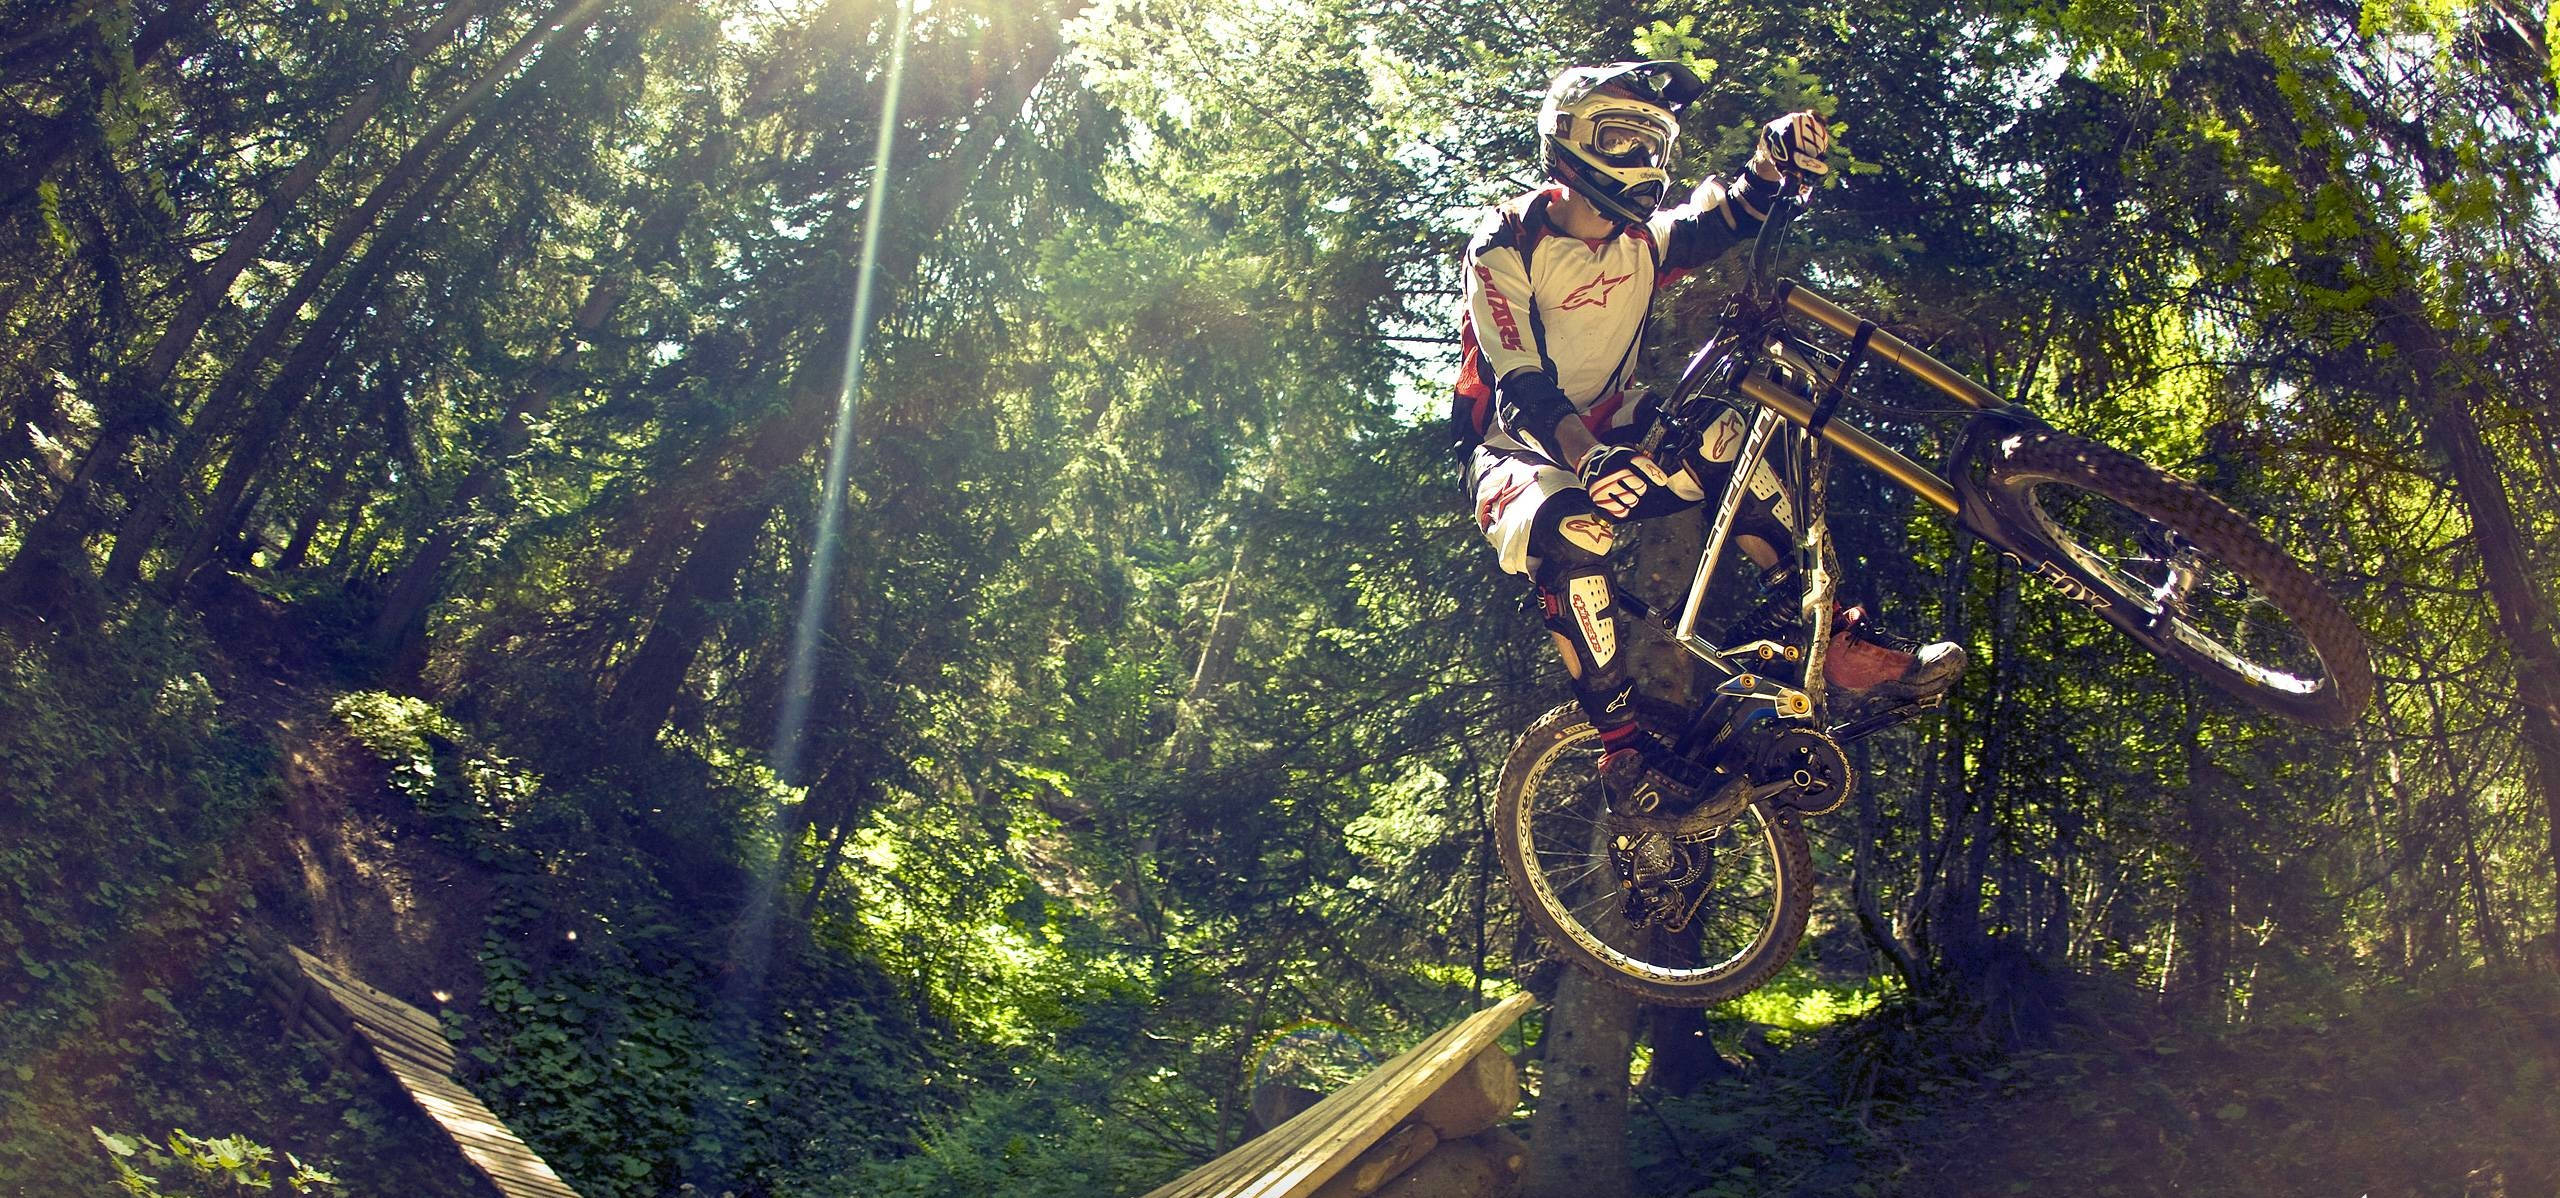 White Mtb Rider In Forest Wallpaper